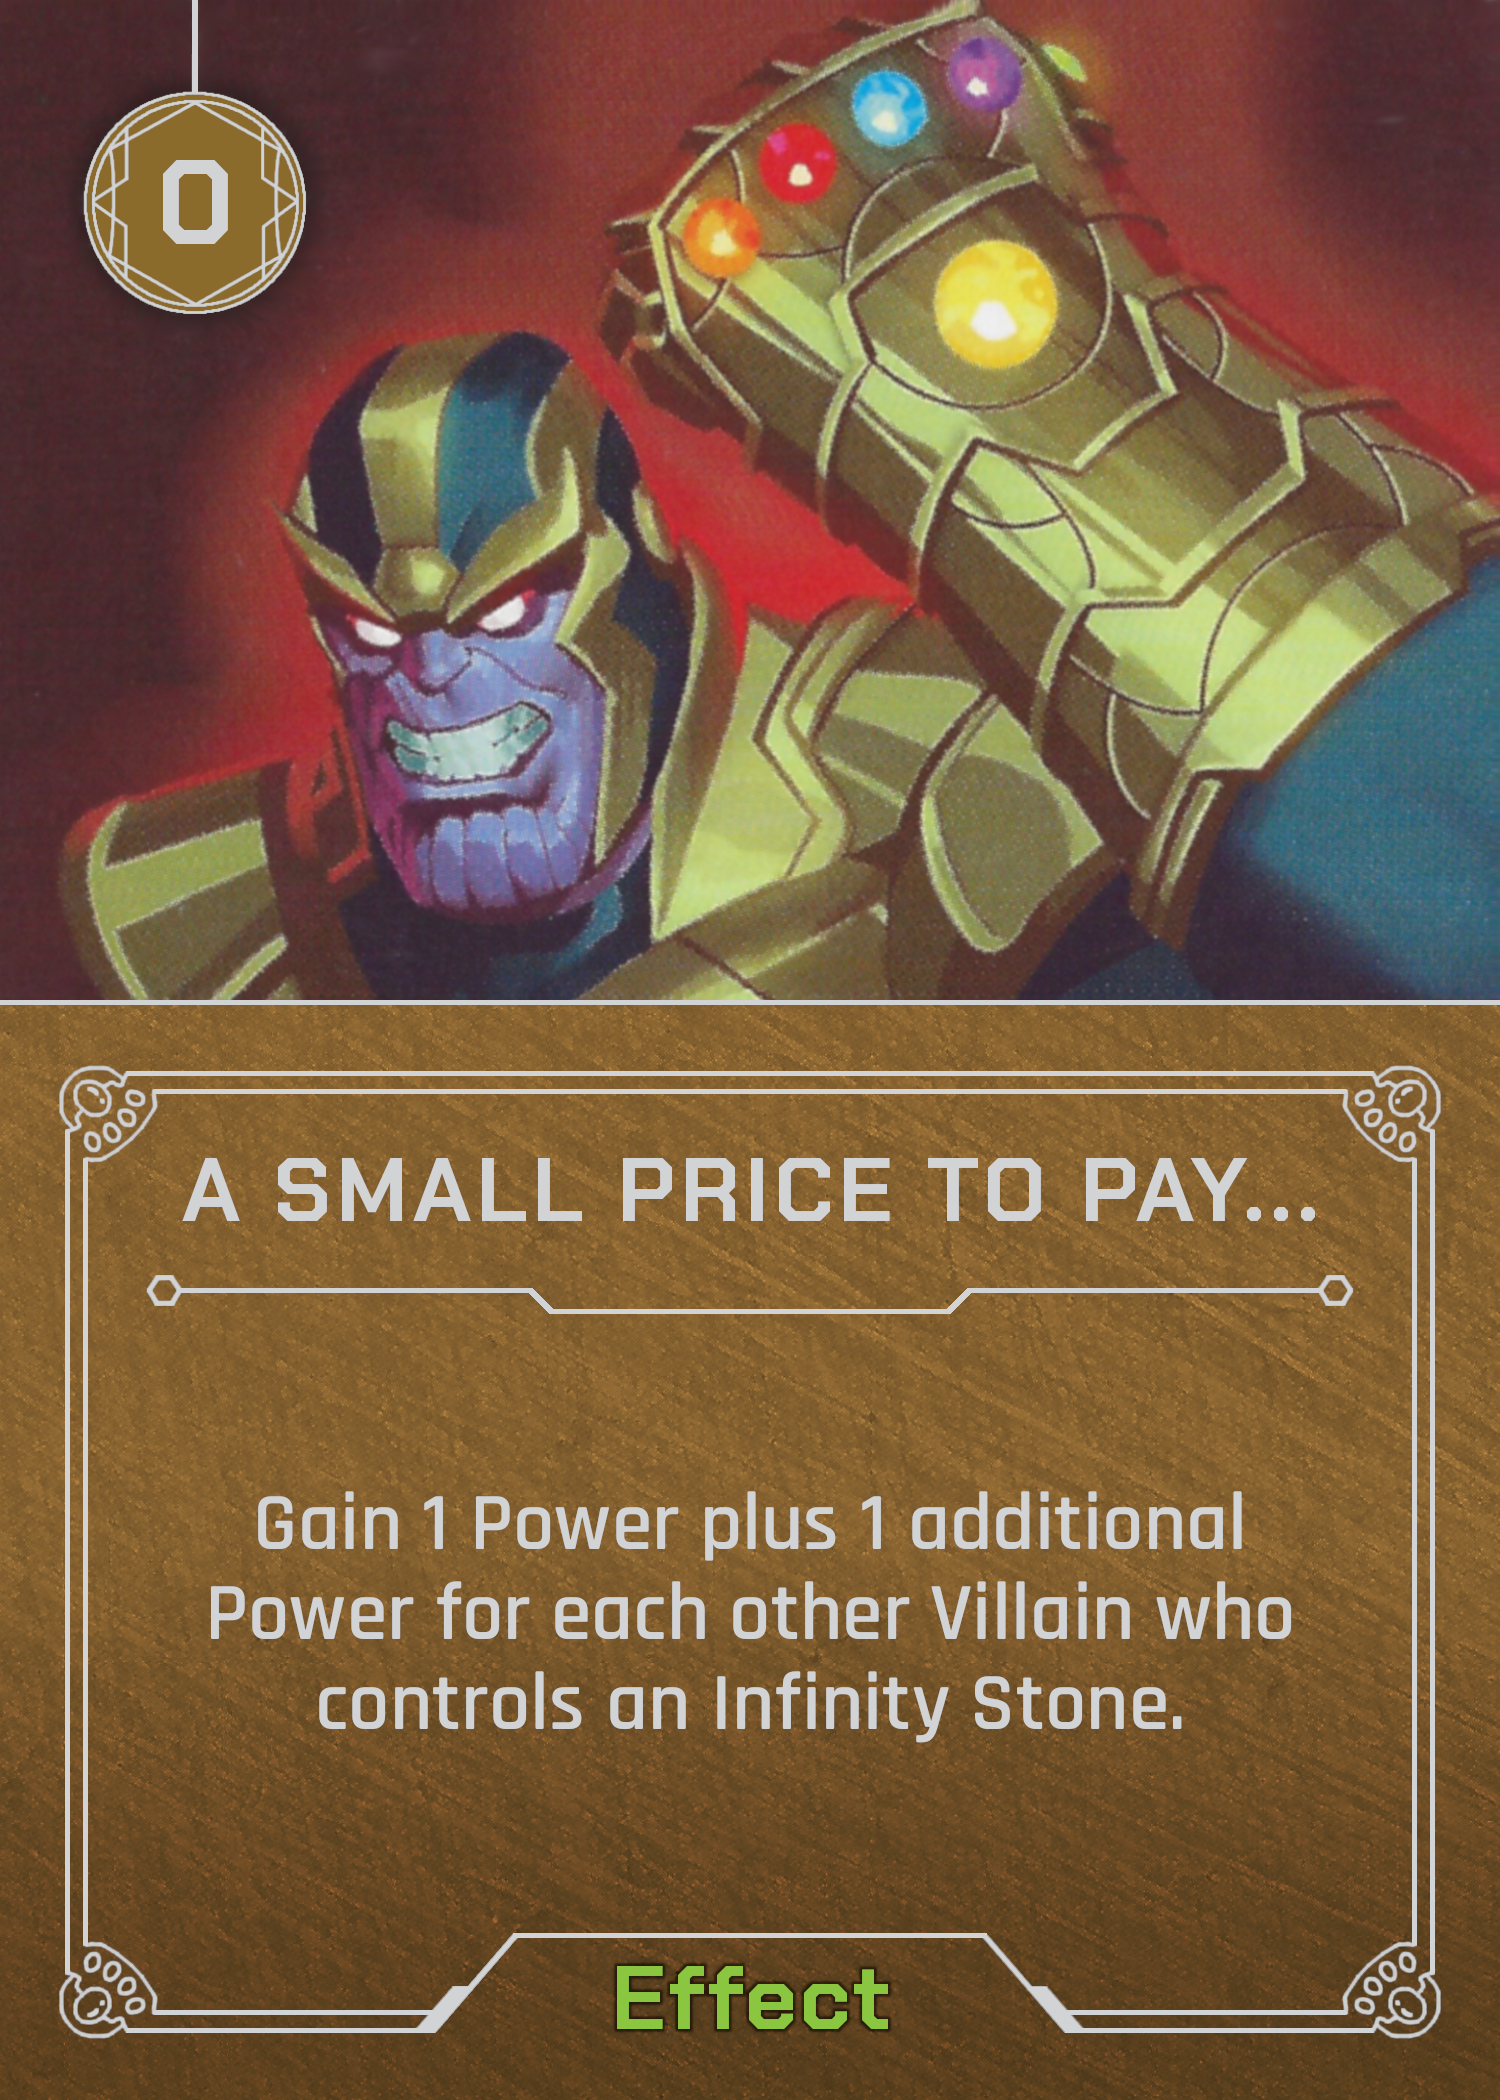 A small price to pay for salvation. (III Avengers 66:59)